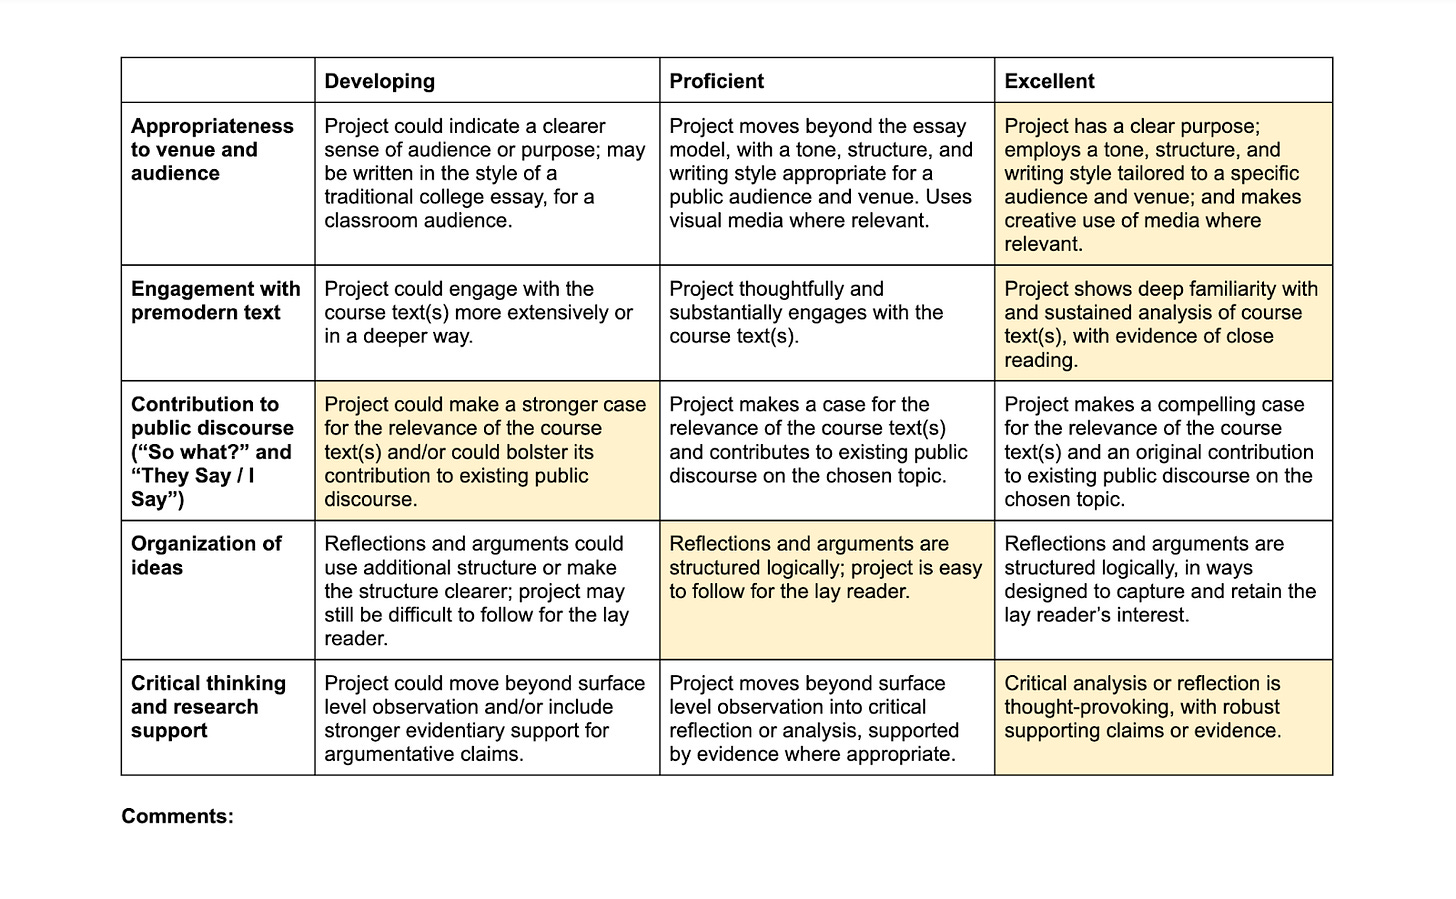 Screenshot of a rubric table. The columns are headed with marks of “developing,” “proficient,” and “excellent.” The rows are headed with categories like “engagement with premodern text, “organization of ideas,” and “critical thinking and research support.” Interior blocks are highlighted to indicate whether the student received a developing, proficient, or excellent rating in each category. 